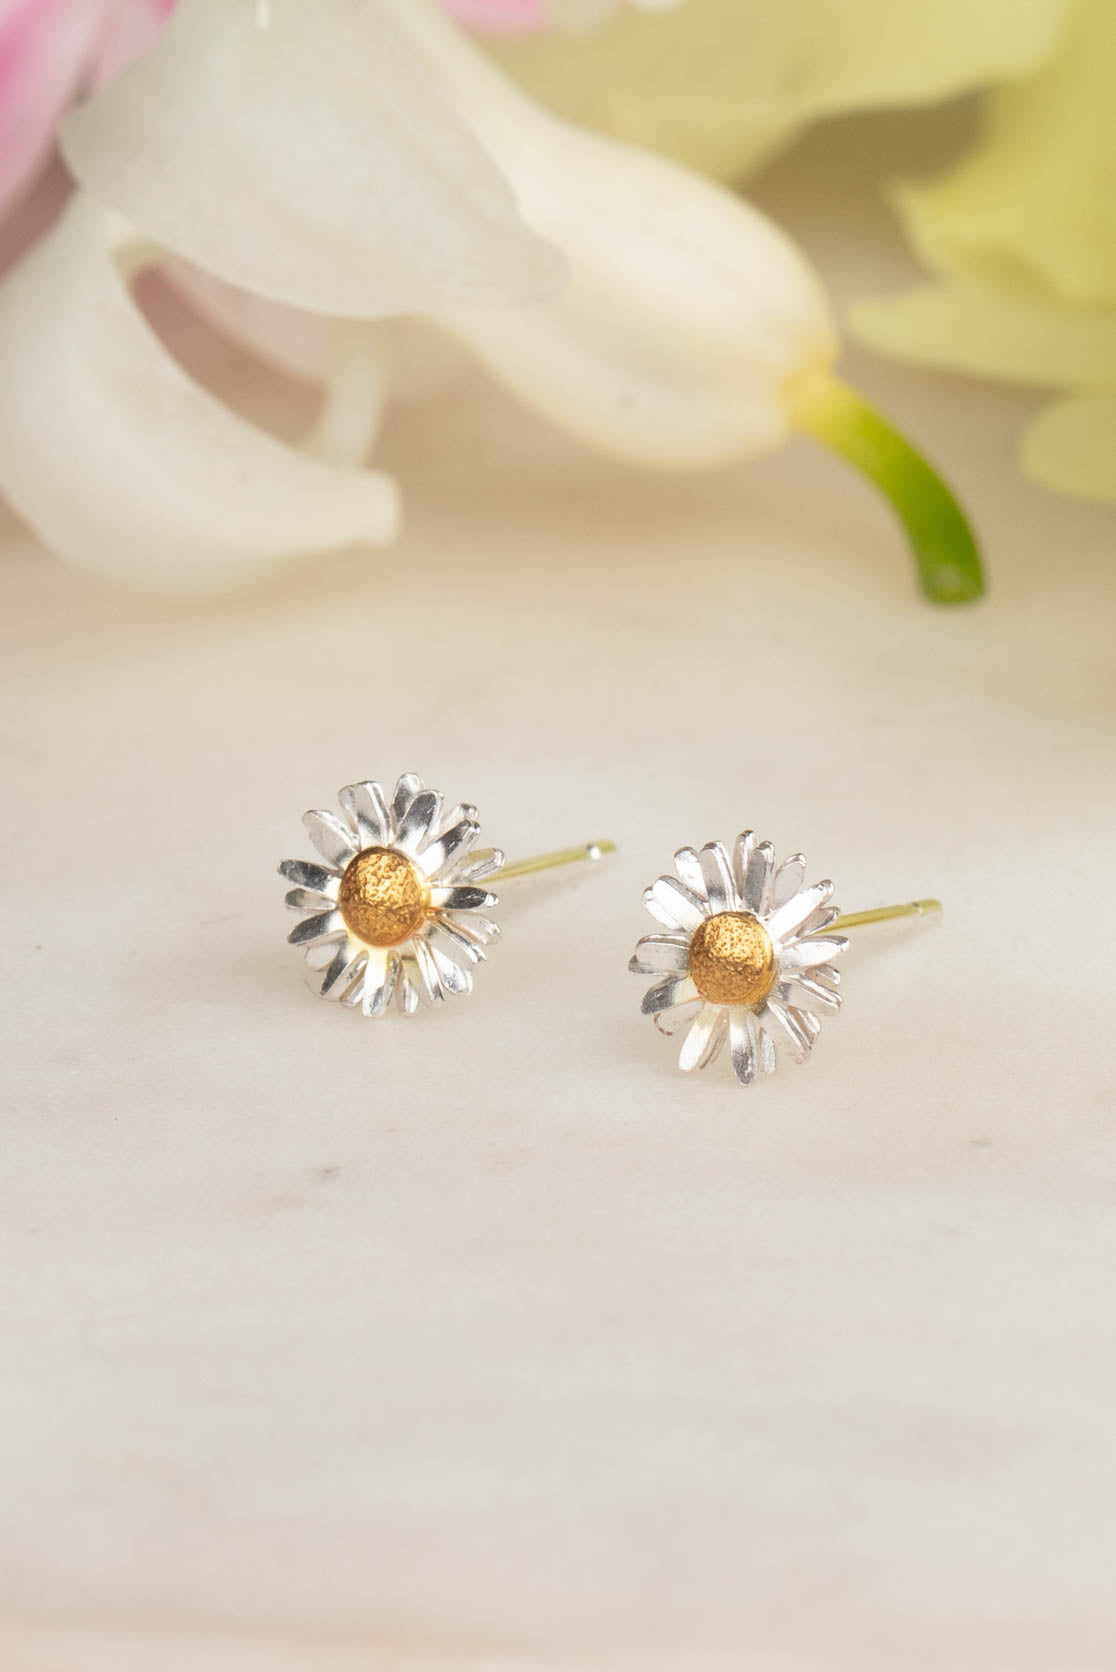 Daisy Stud Earrings in Sterling Silver and Gold - stud of the month May